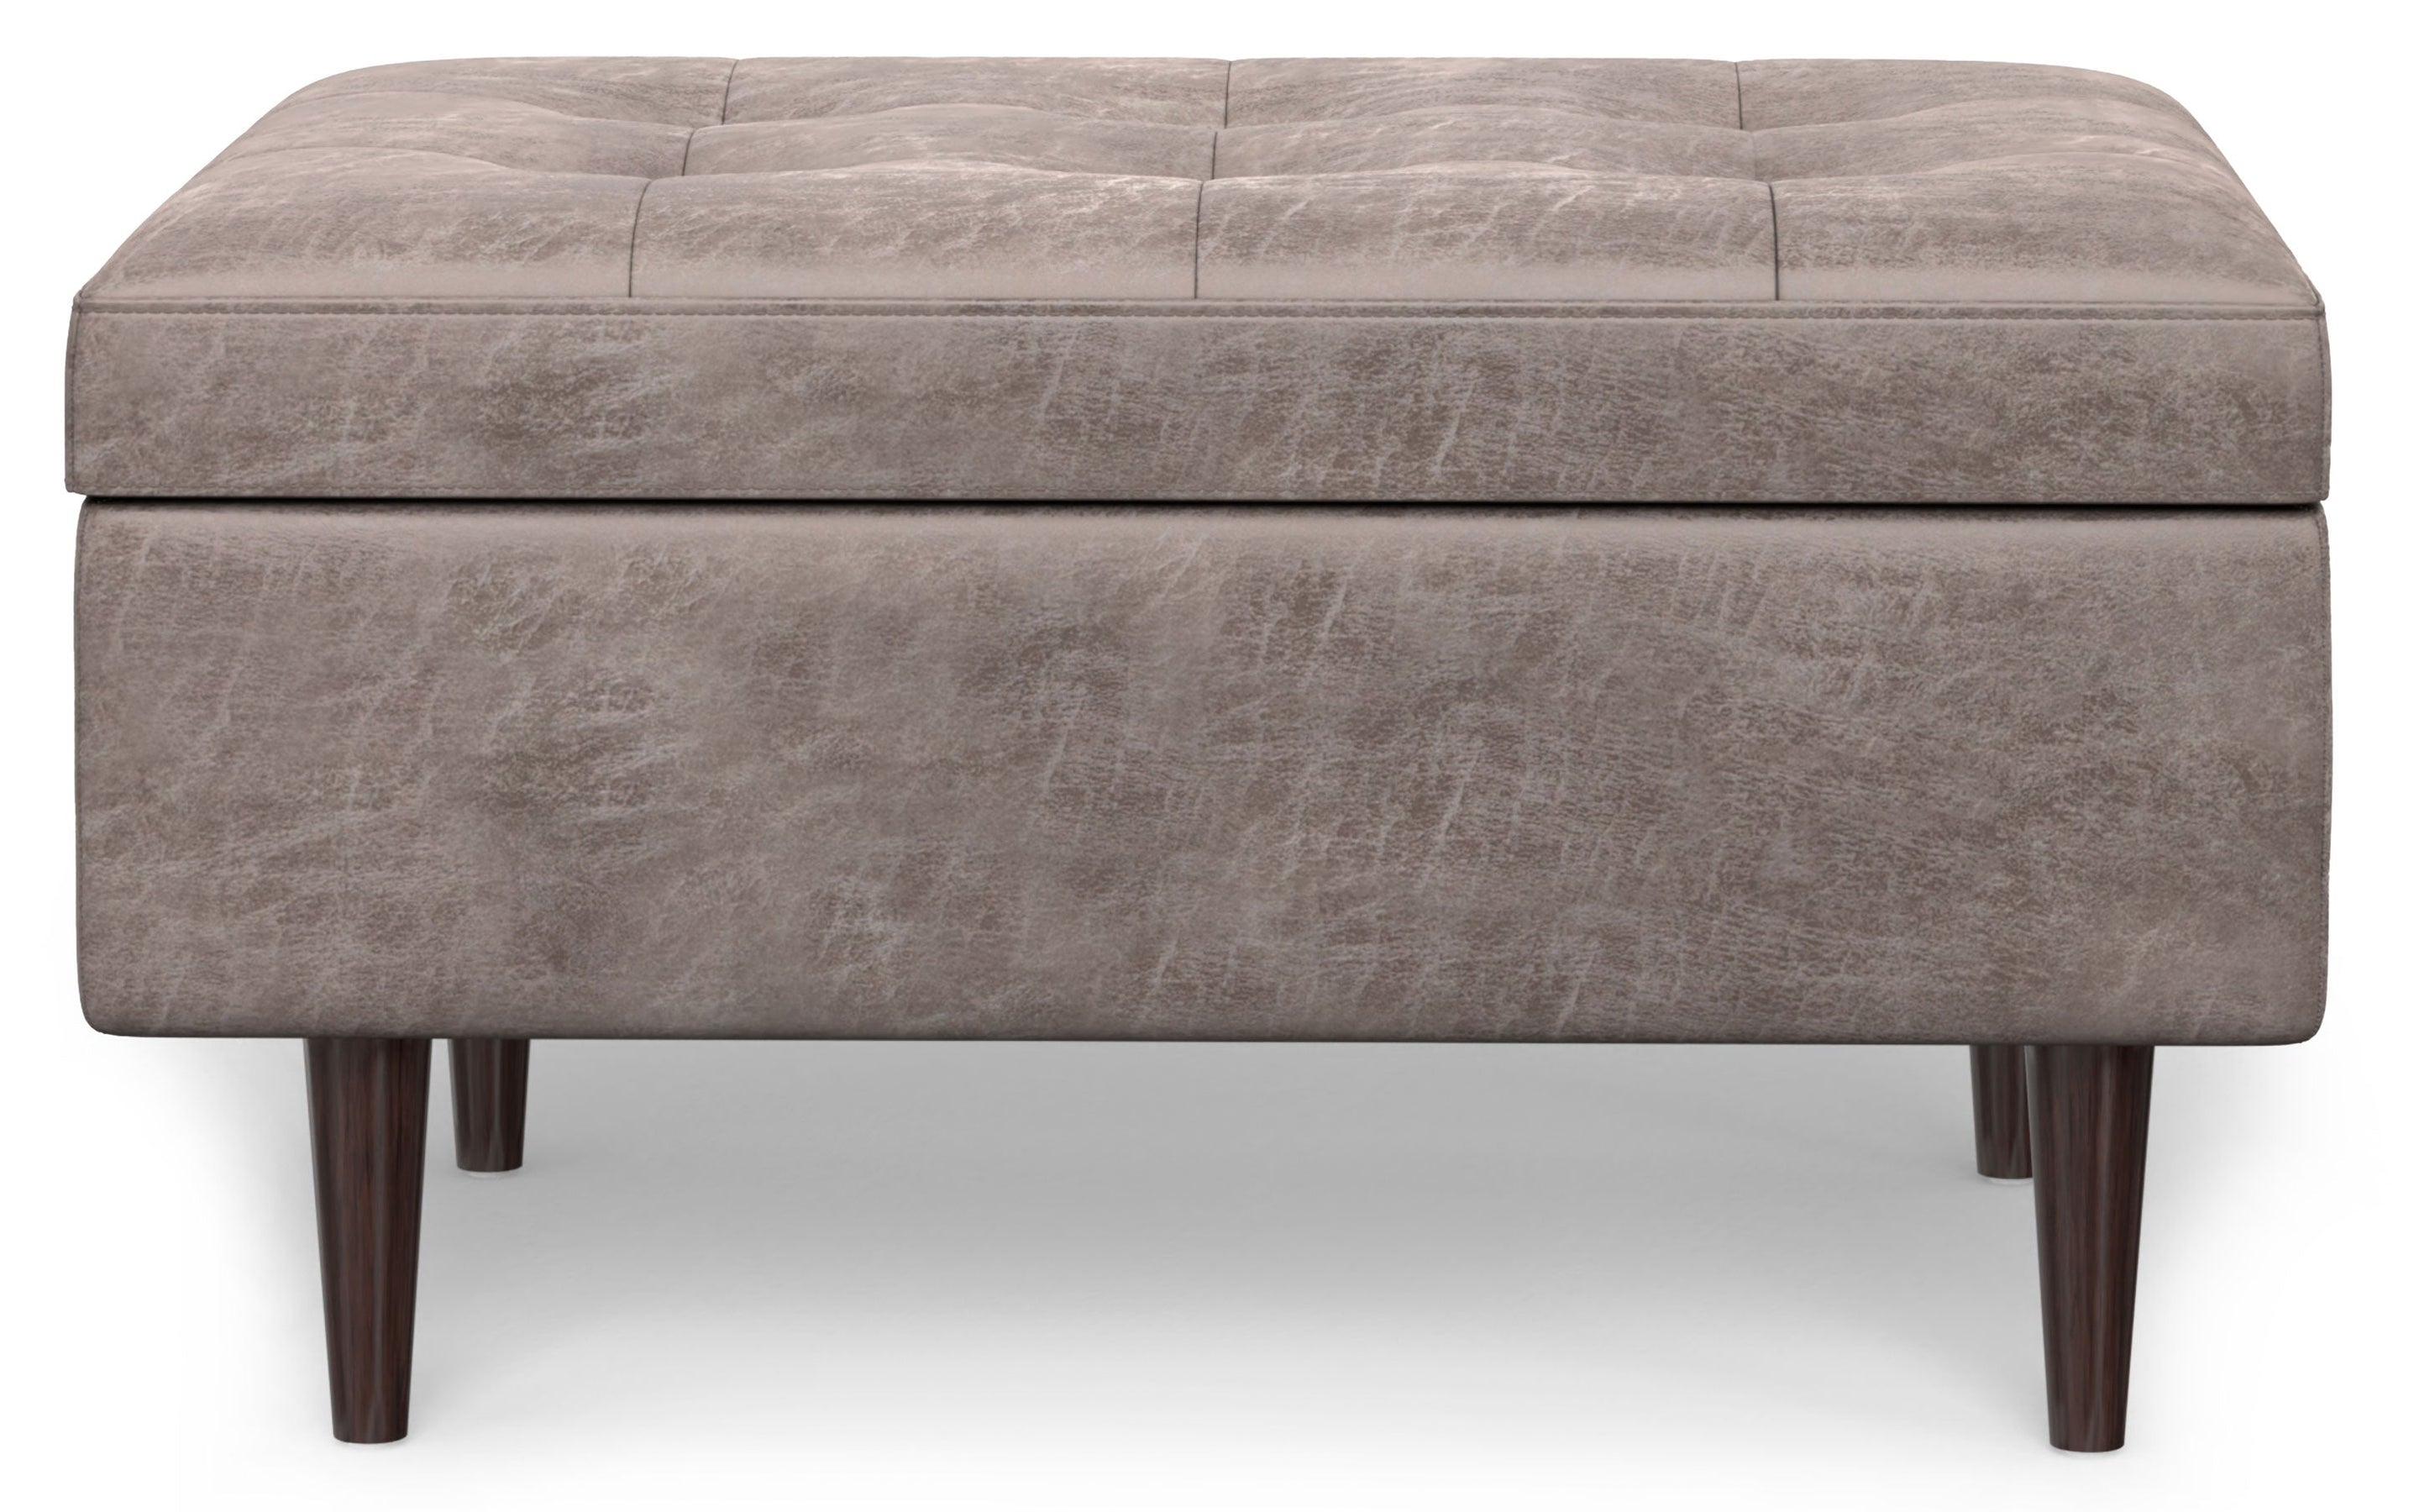 Distressed Grey Taupe Distressed Vegan Leather | Shay Mid Century Small Square Coffee Table Storage Ottoman